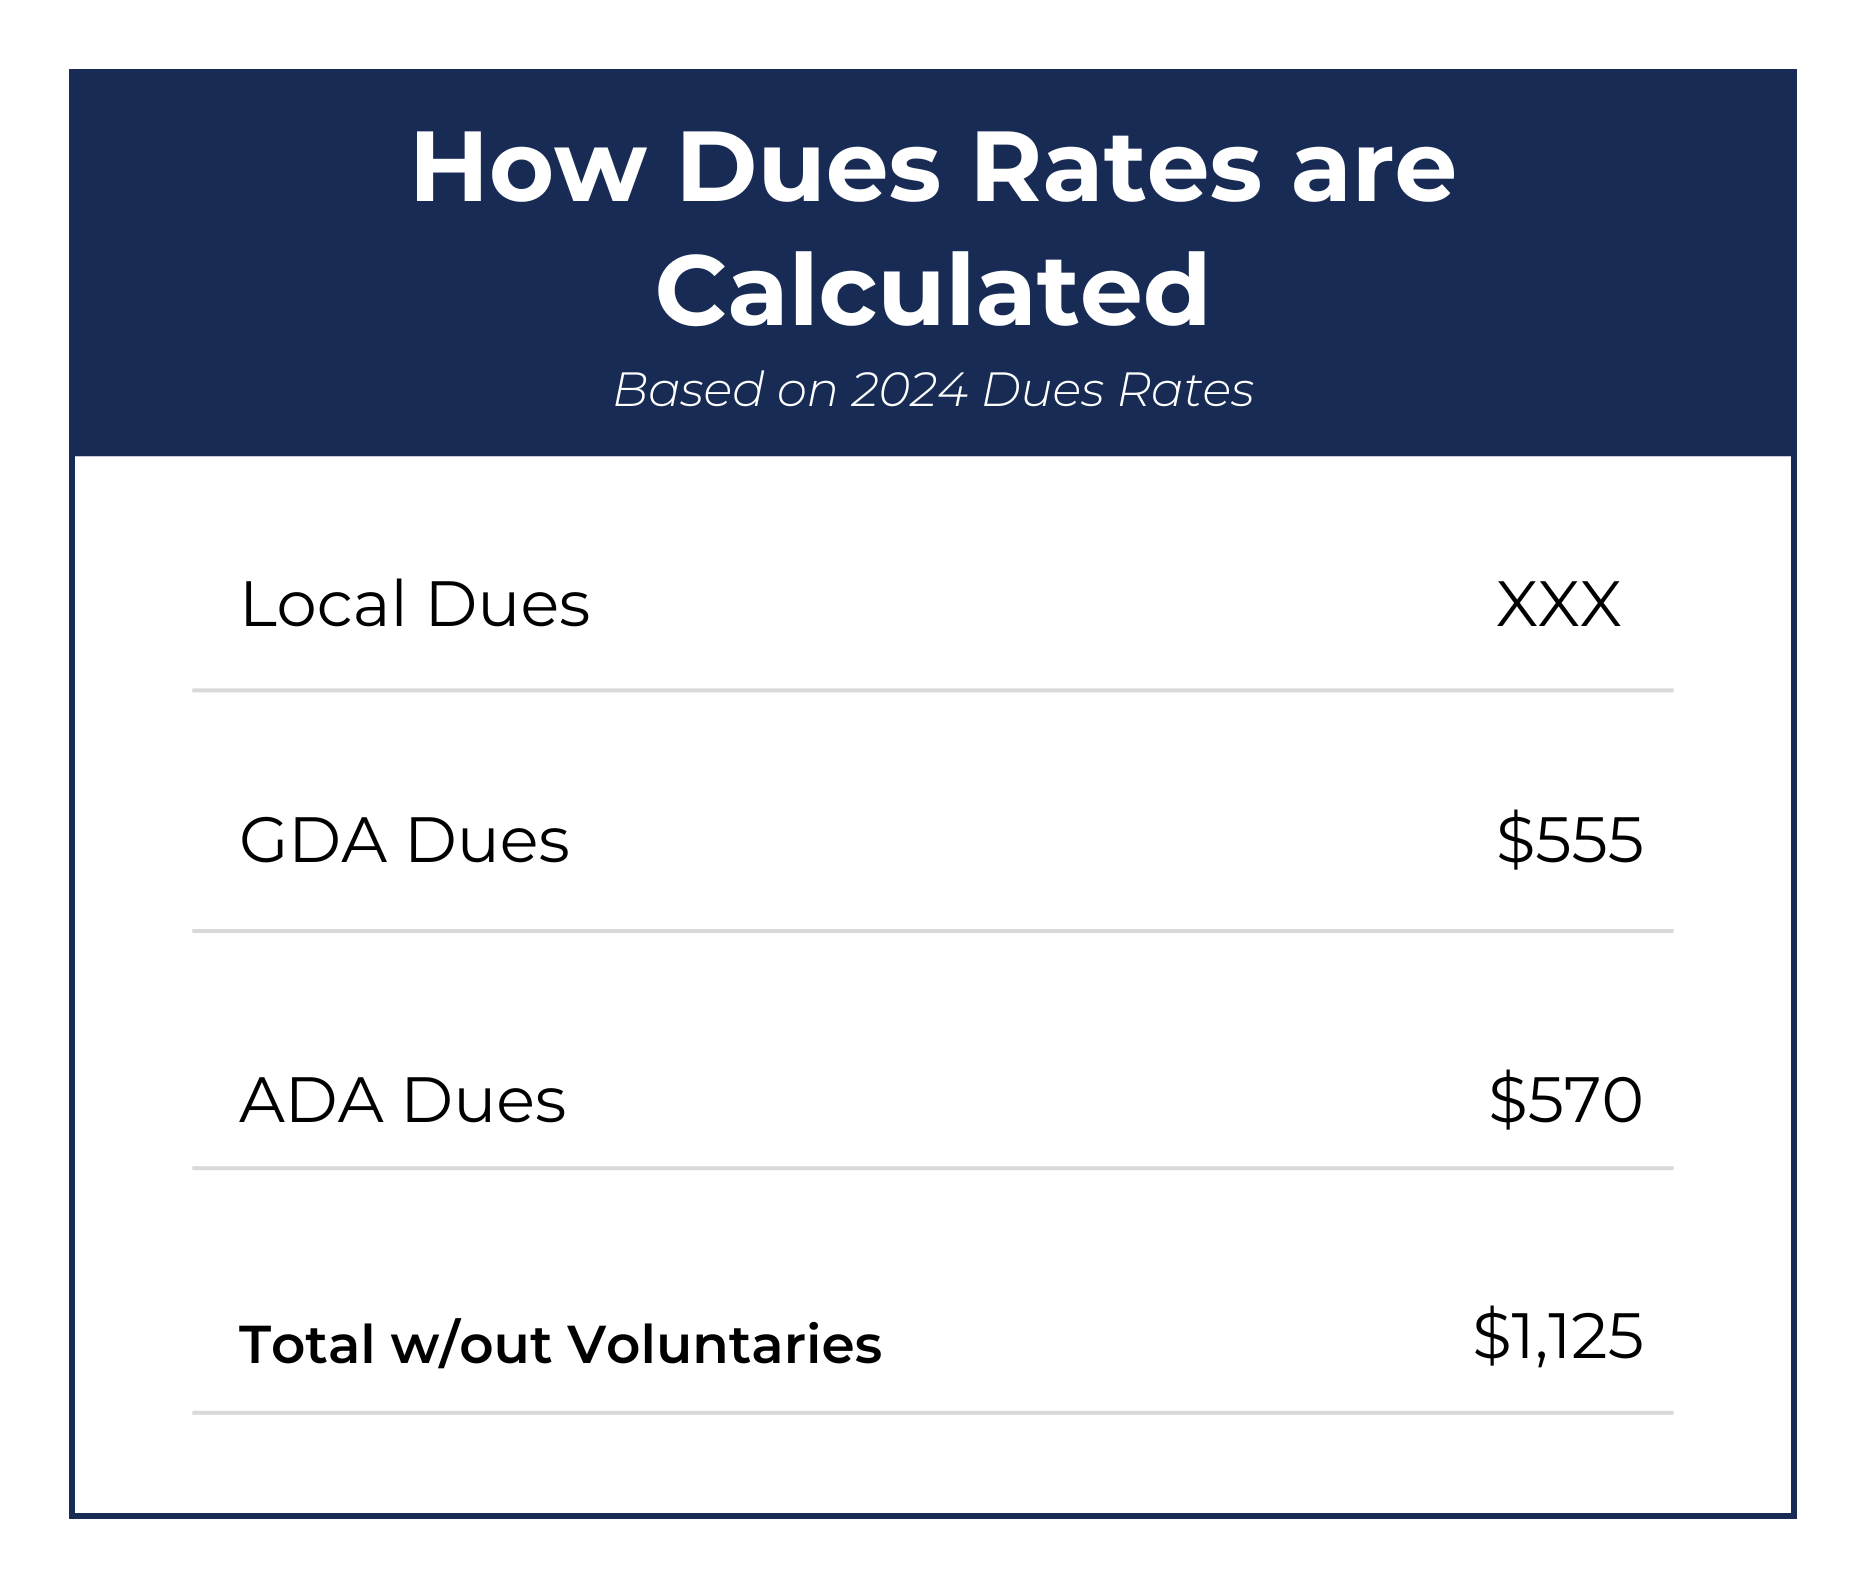 How Dues Rates are Calculated (1)